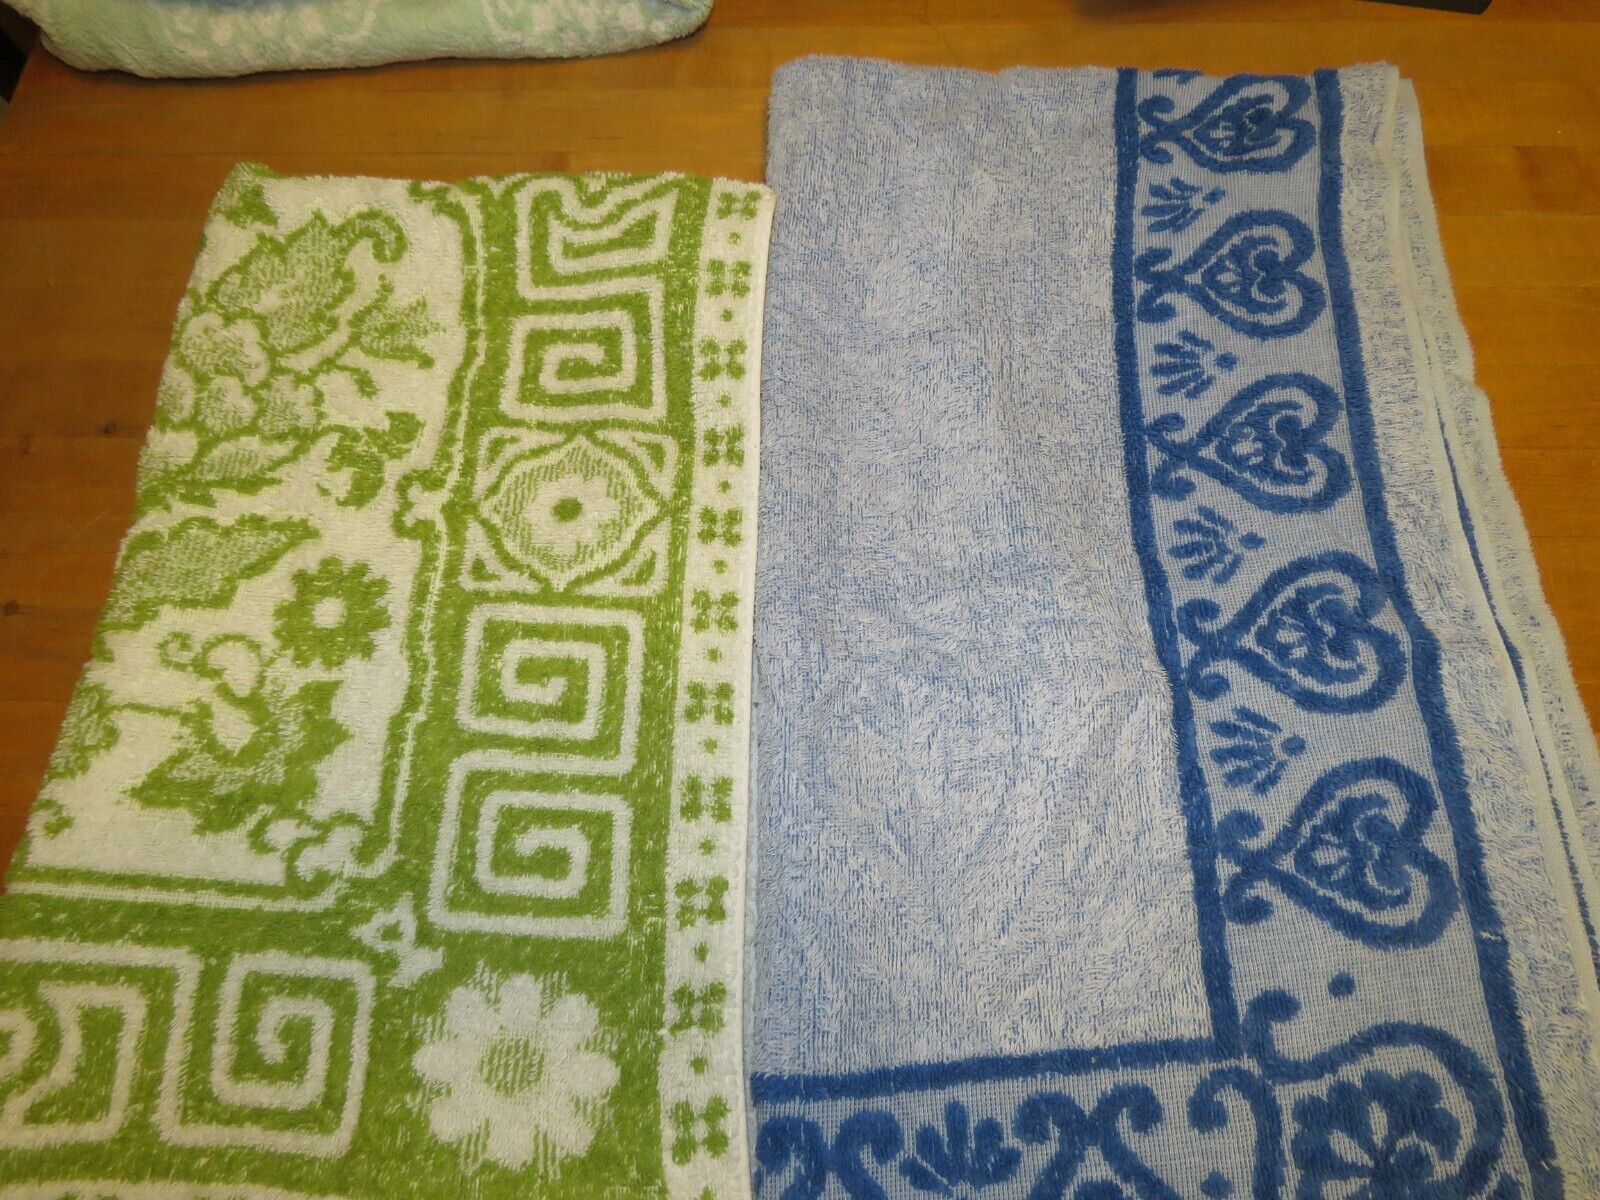 2 Vintage Bath Towels Sears Best Dundee Blue Green Textured Cotton VGC